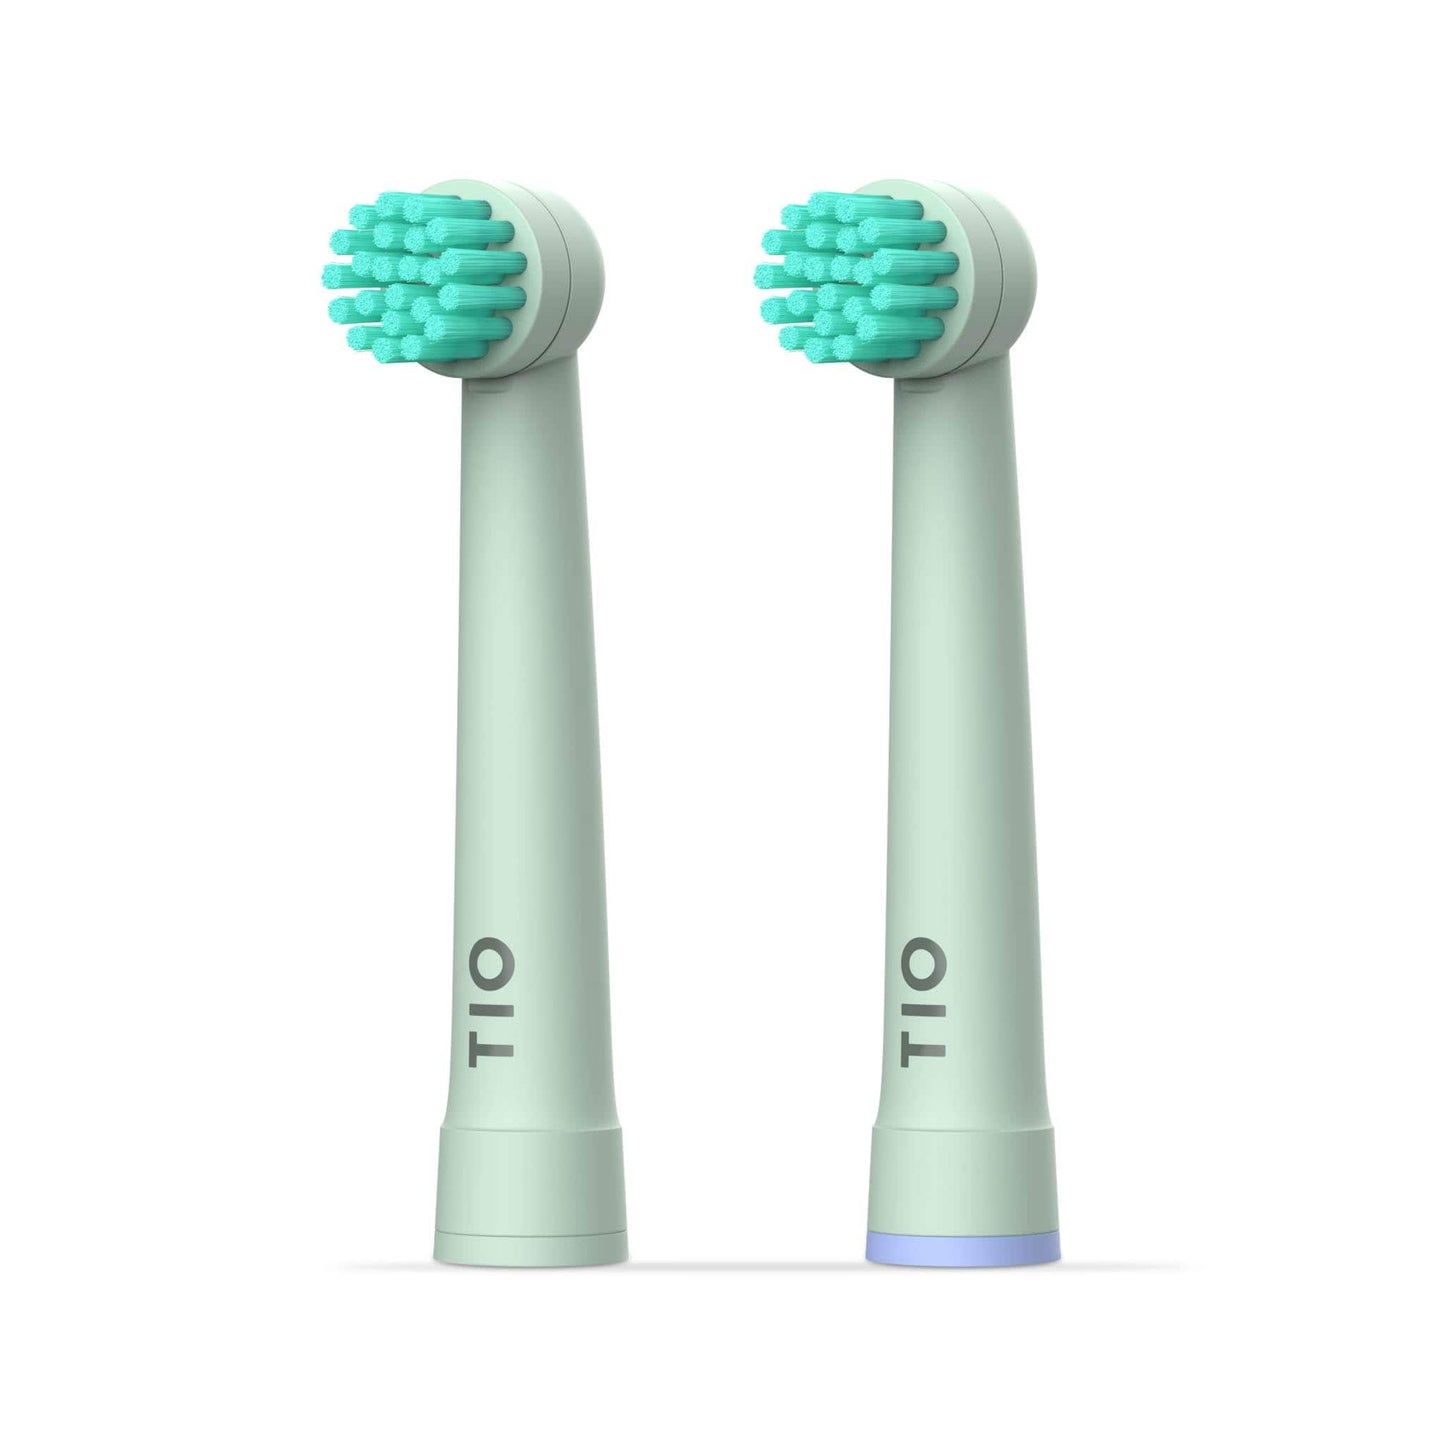 Tio Toothbrushes TIOMATIK Plant based replacement heads compatible with BRAUN Oral-B® electric toothbrushes